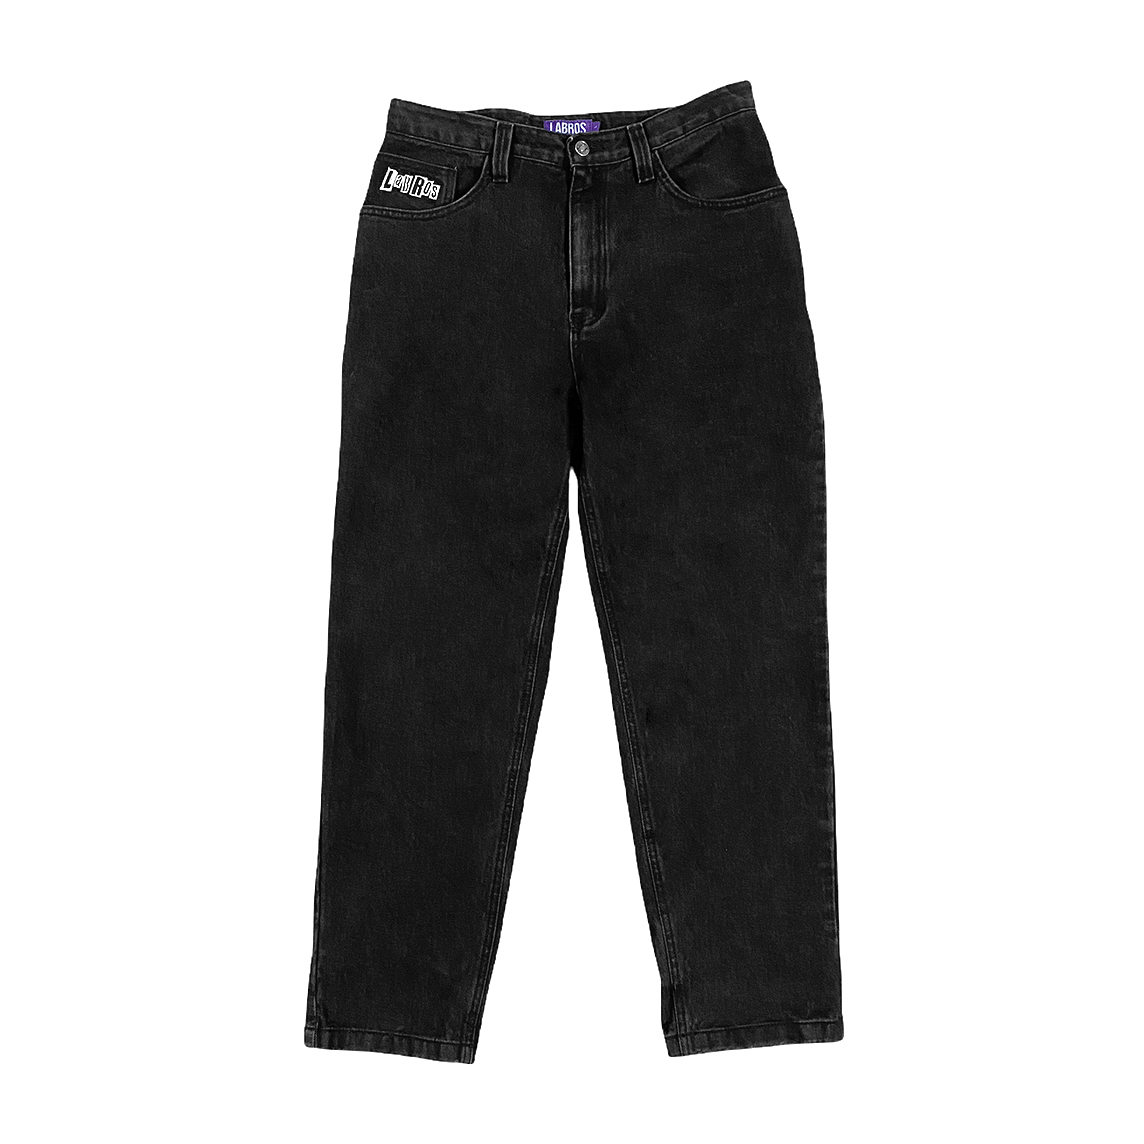 SP Stone Washed Jeans (Black)